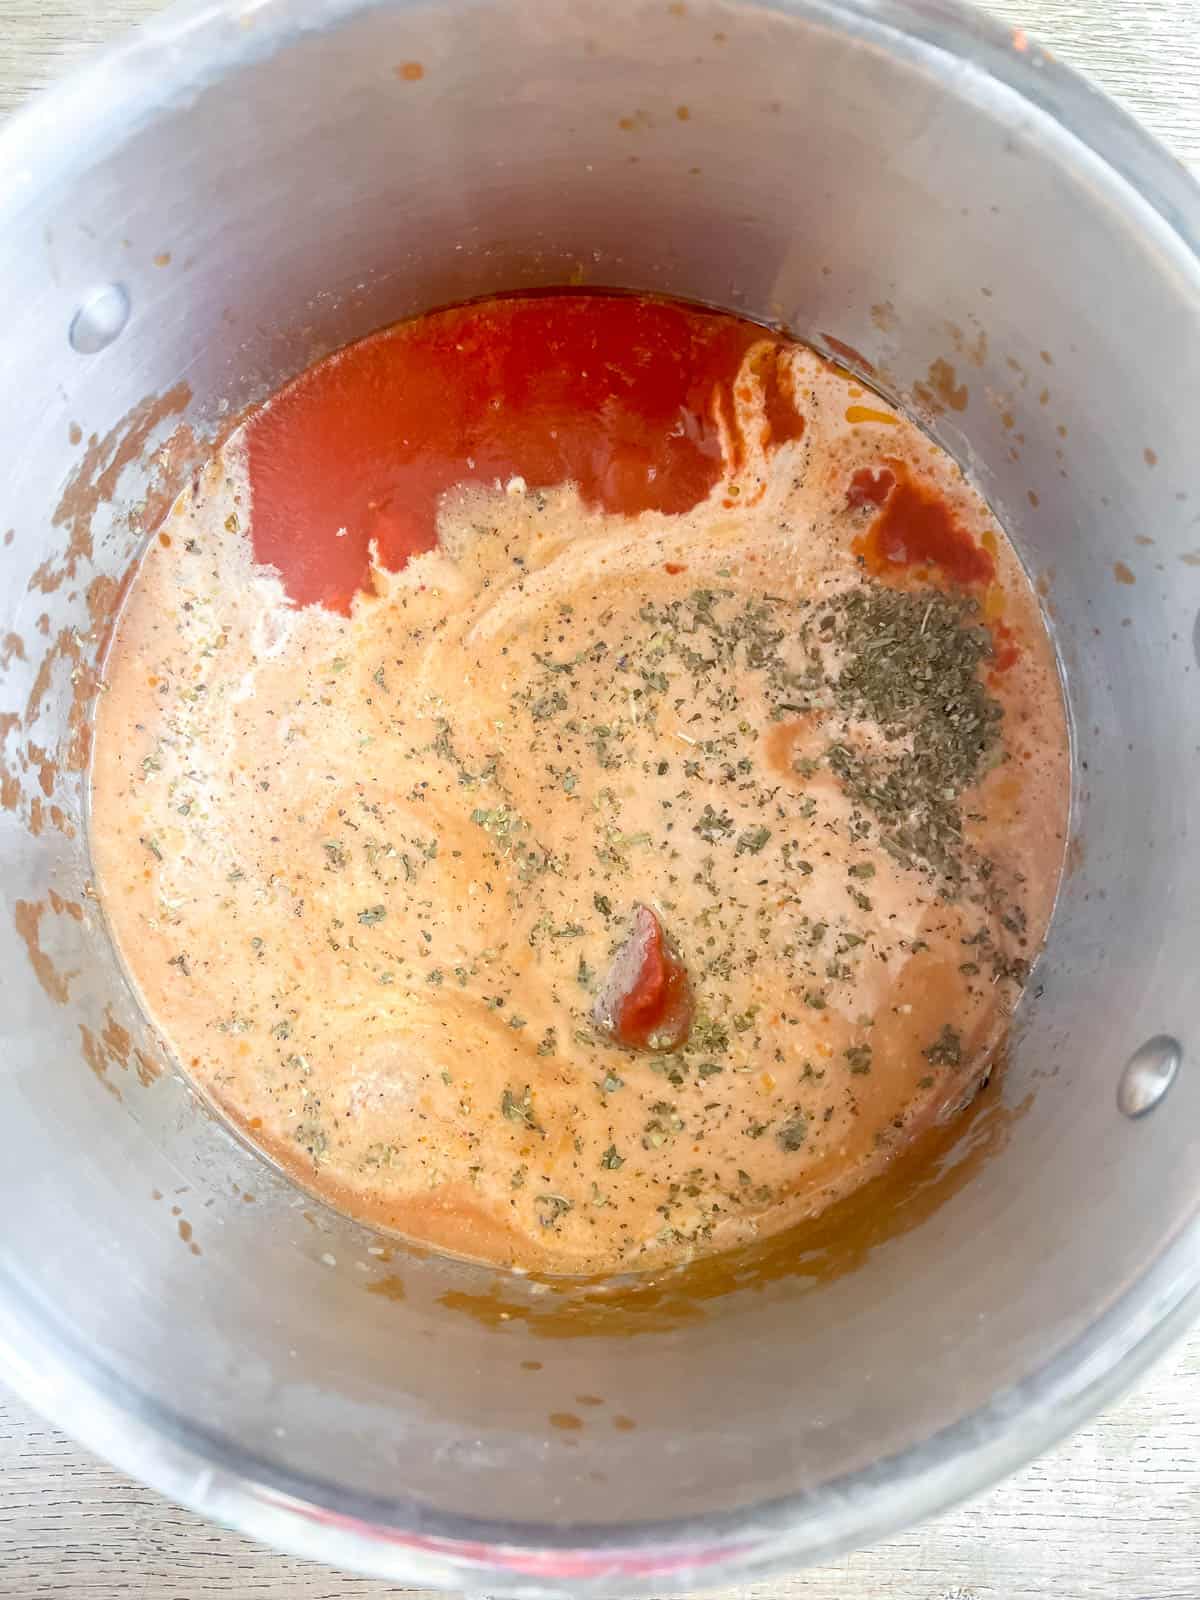 Heavy cream, bone broth, and tomato sauce added to a pan.